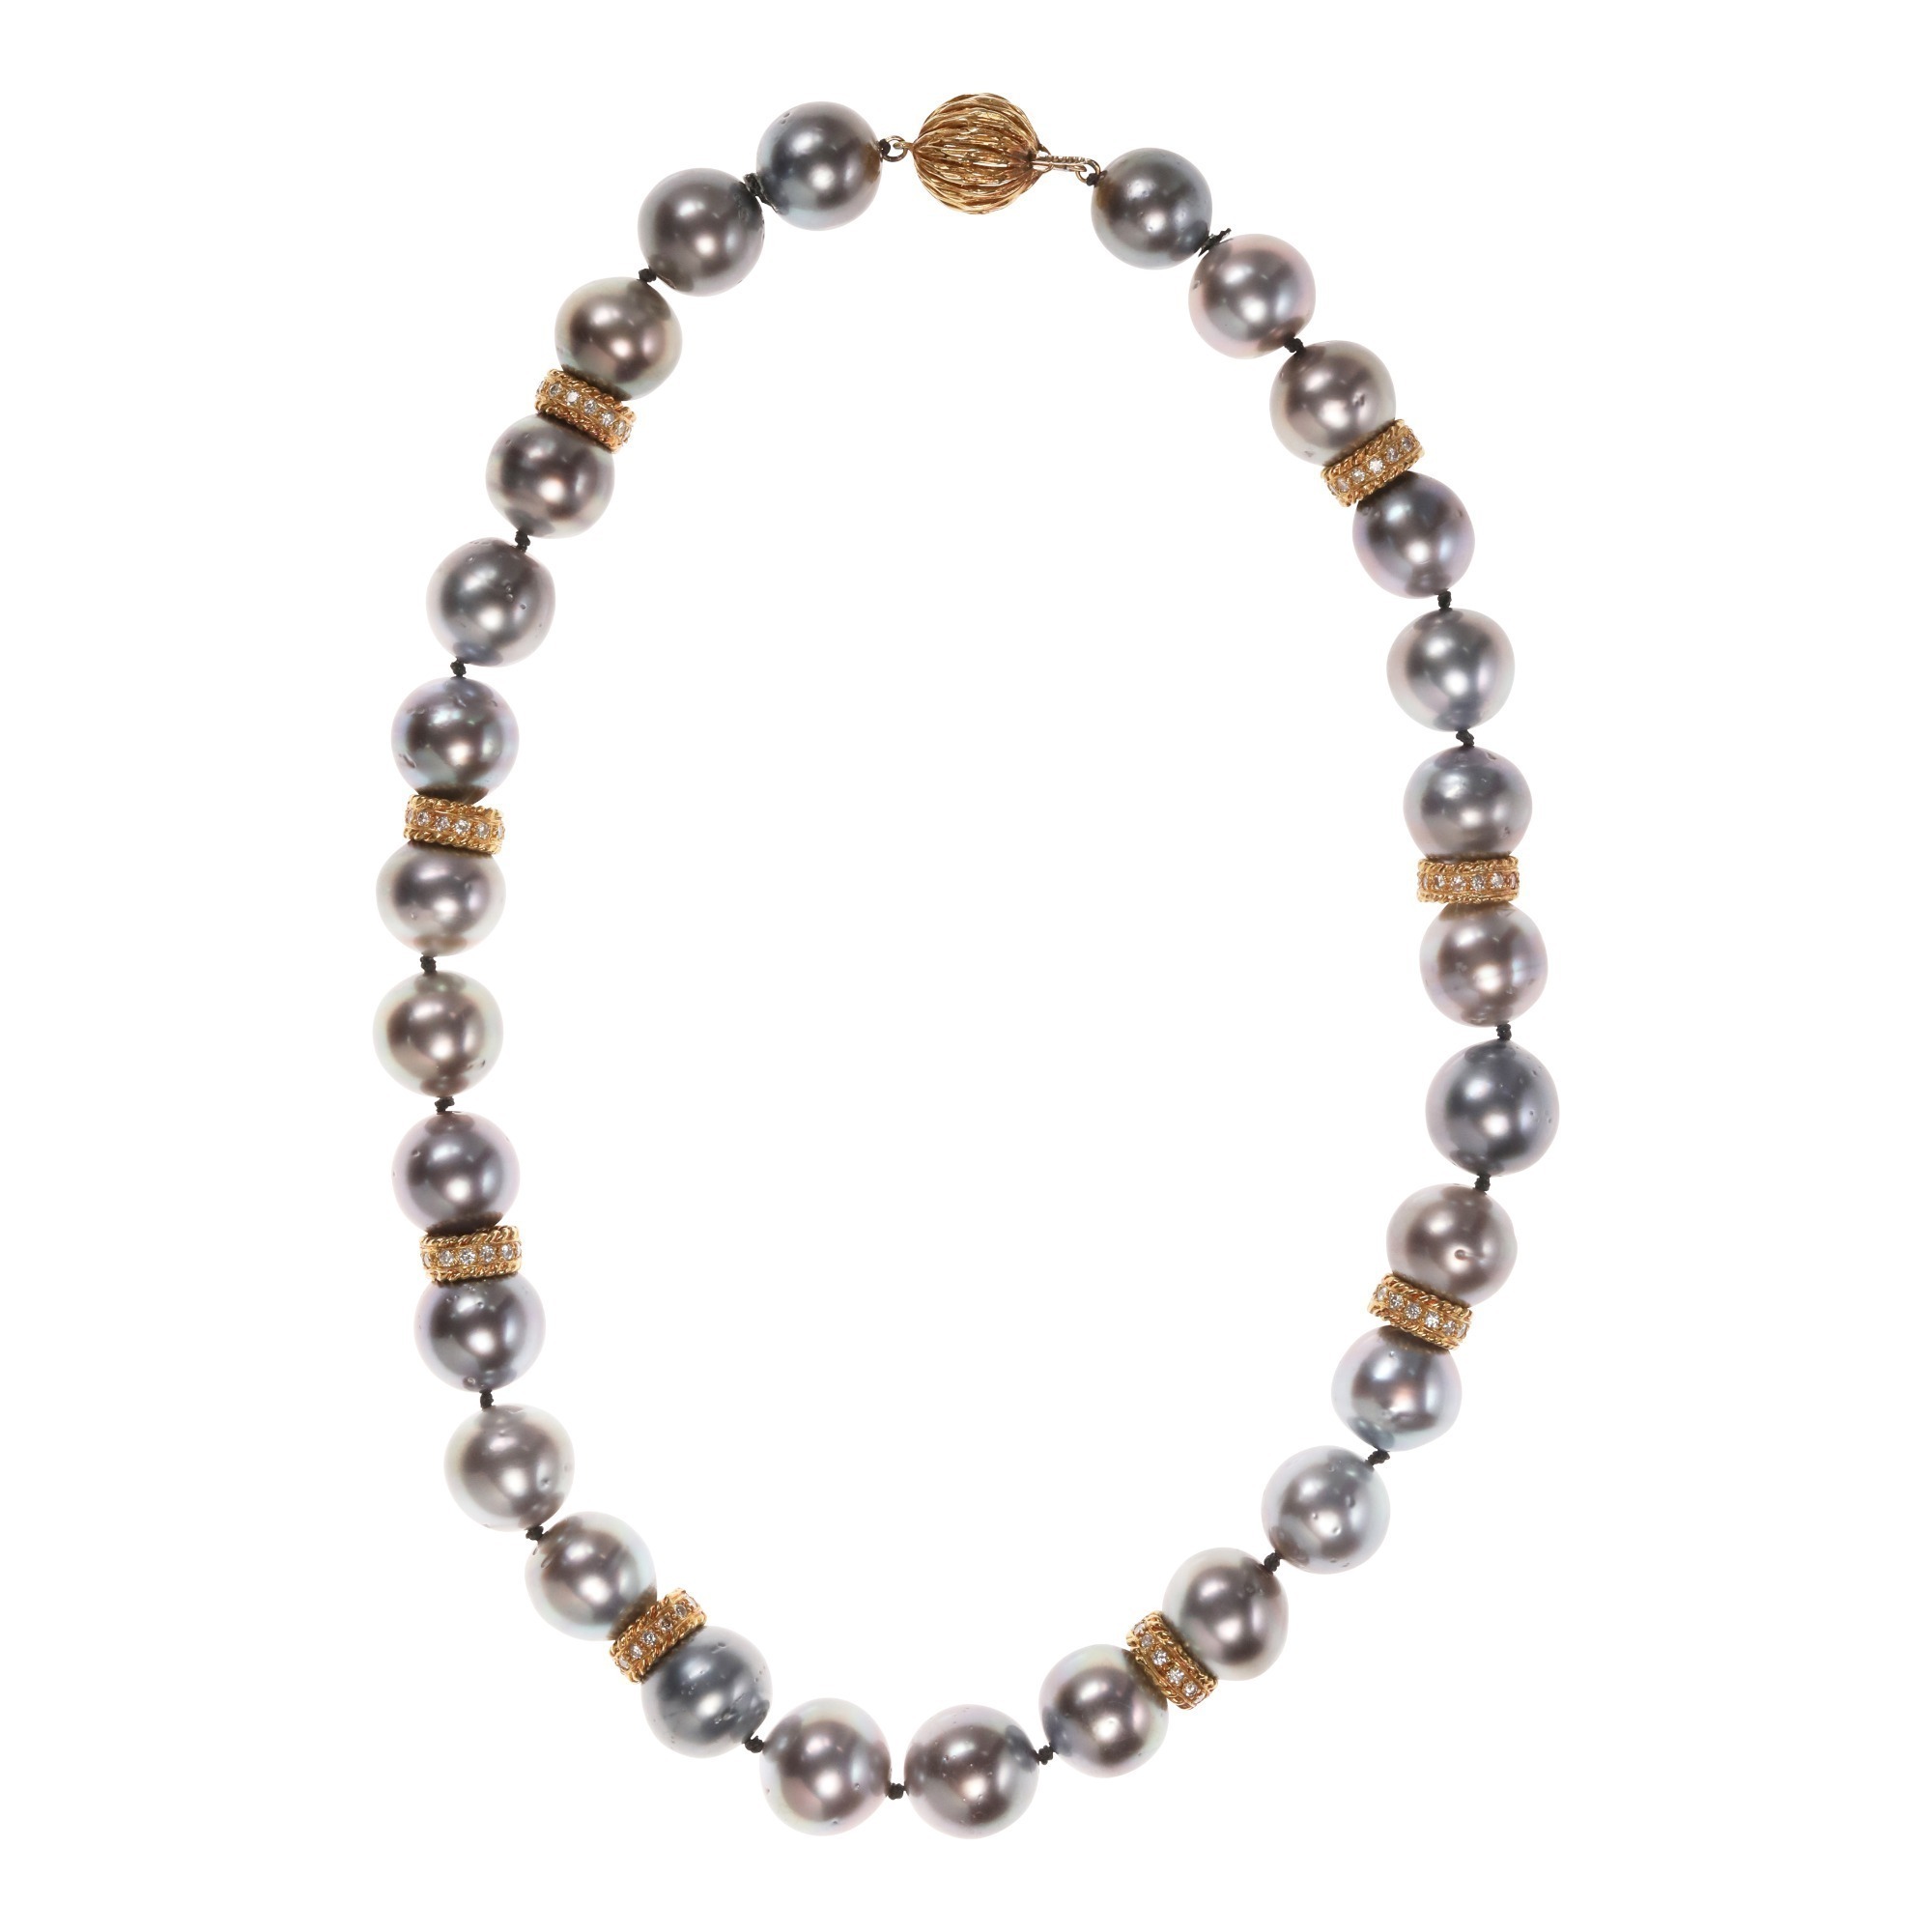 A South Sea Cultured Black Pearl, 18K Yellow Gold and Diamond Necklace with 12mm to12.5mm Pearls